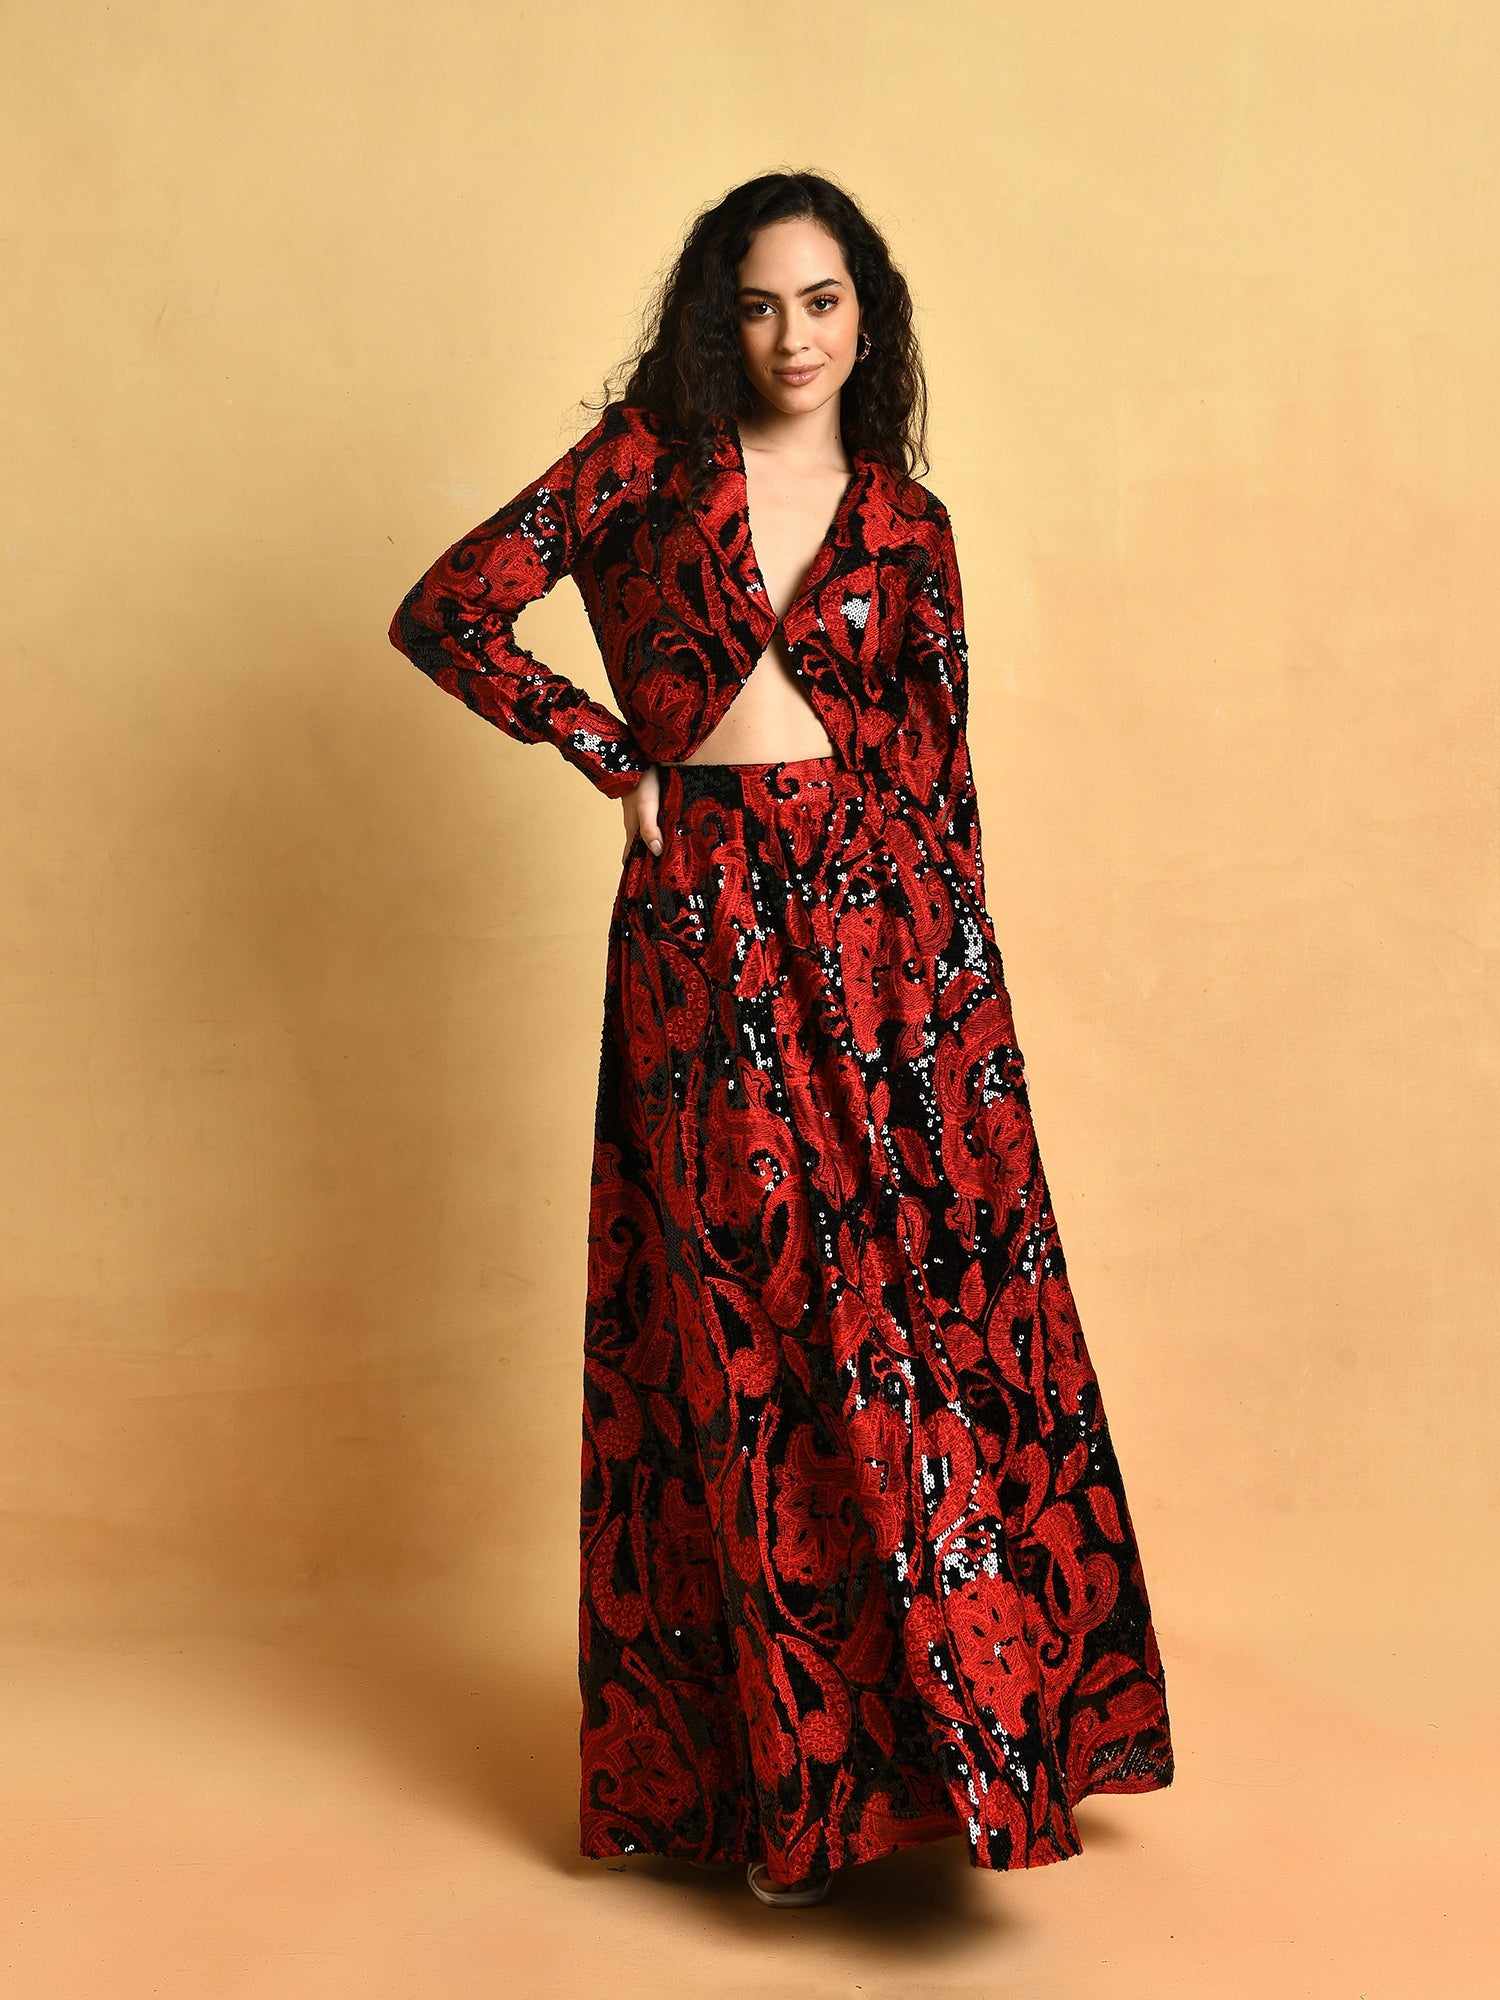 delux slinky red black embroidered skirt